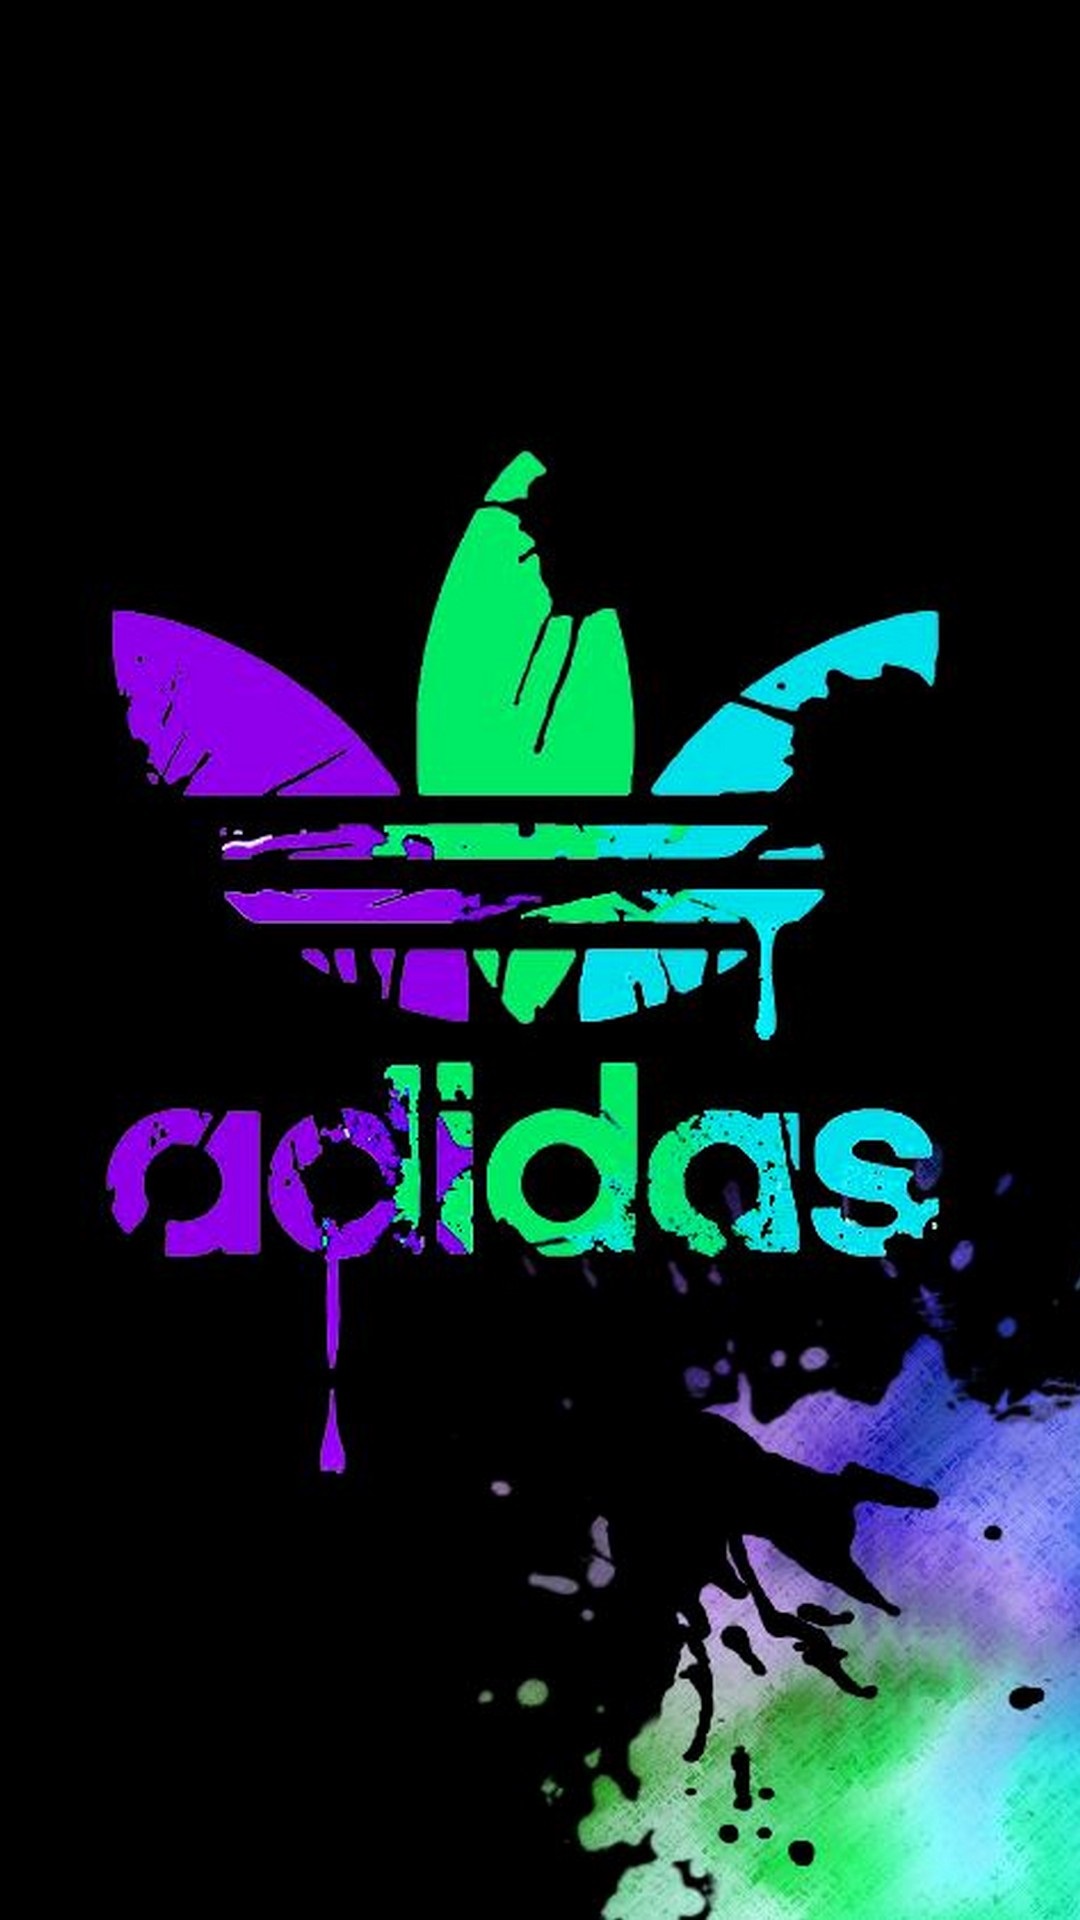 iPhone Wallpaper HD Adidas with high-resolution 1080x1920 pixel. You can use this wallpaper for your iPhone 5, 6, 7, 8, X, XS, XR backgrounds, Mobile Screensaver, or iPad Lock Screen